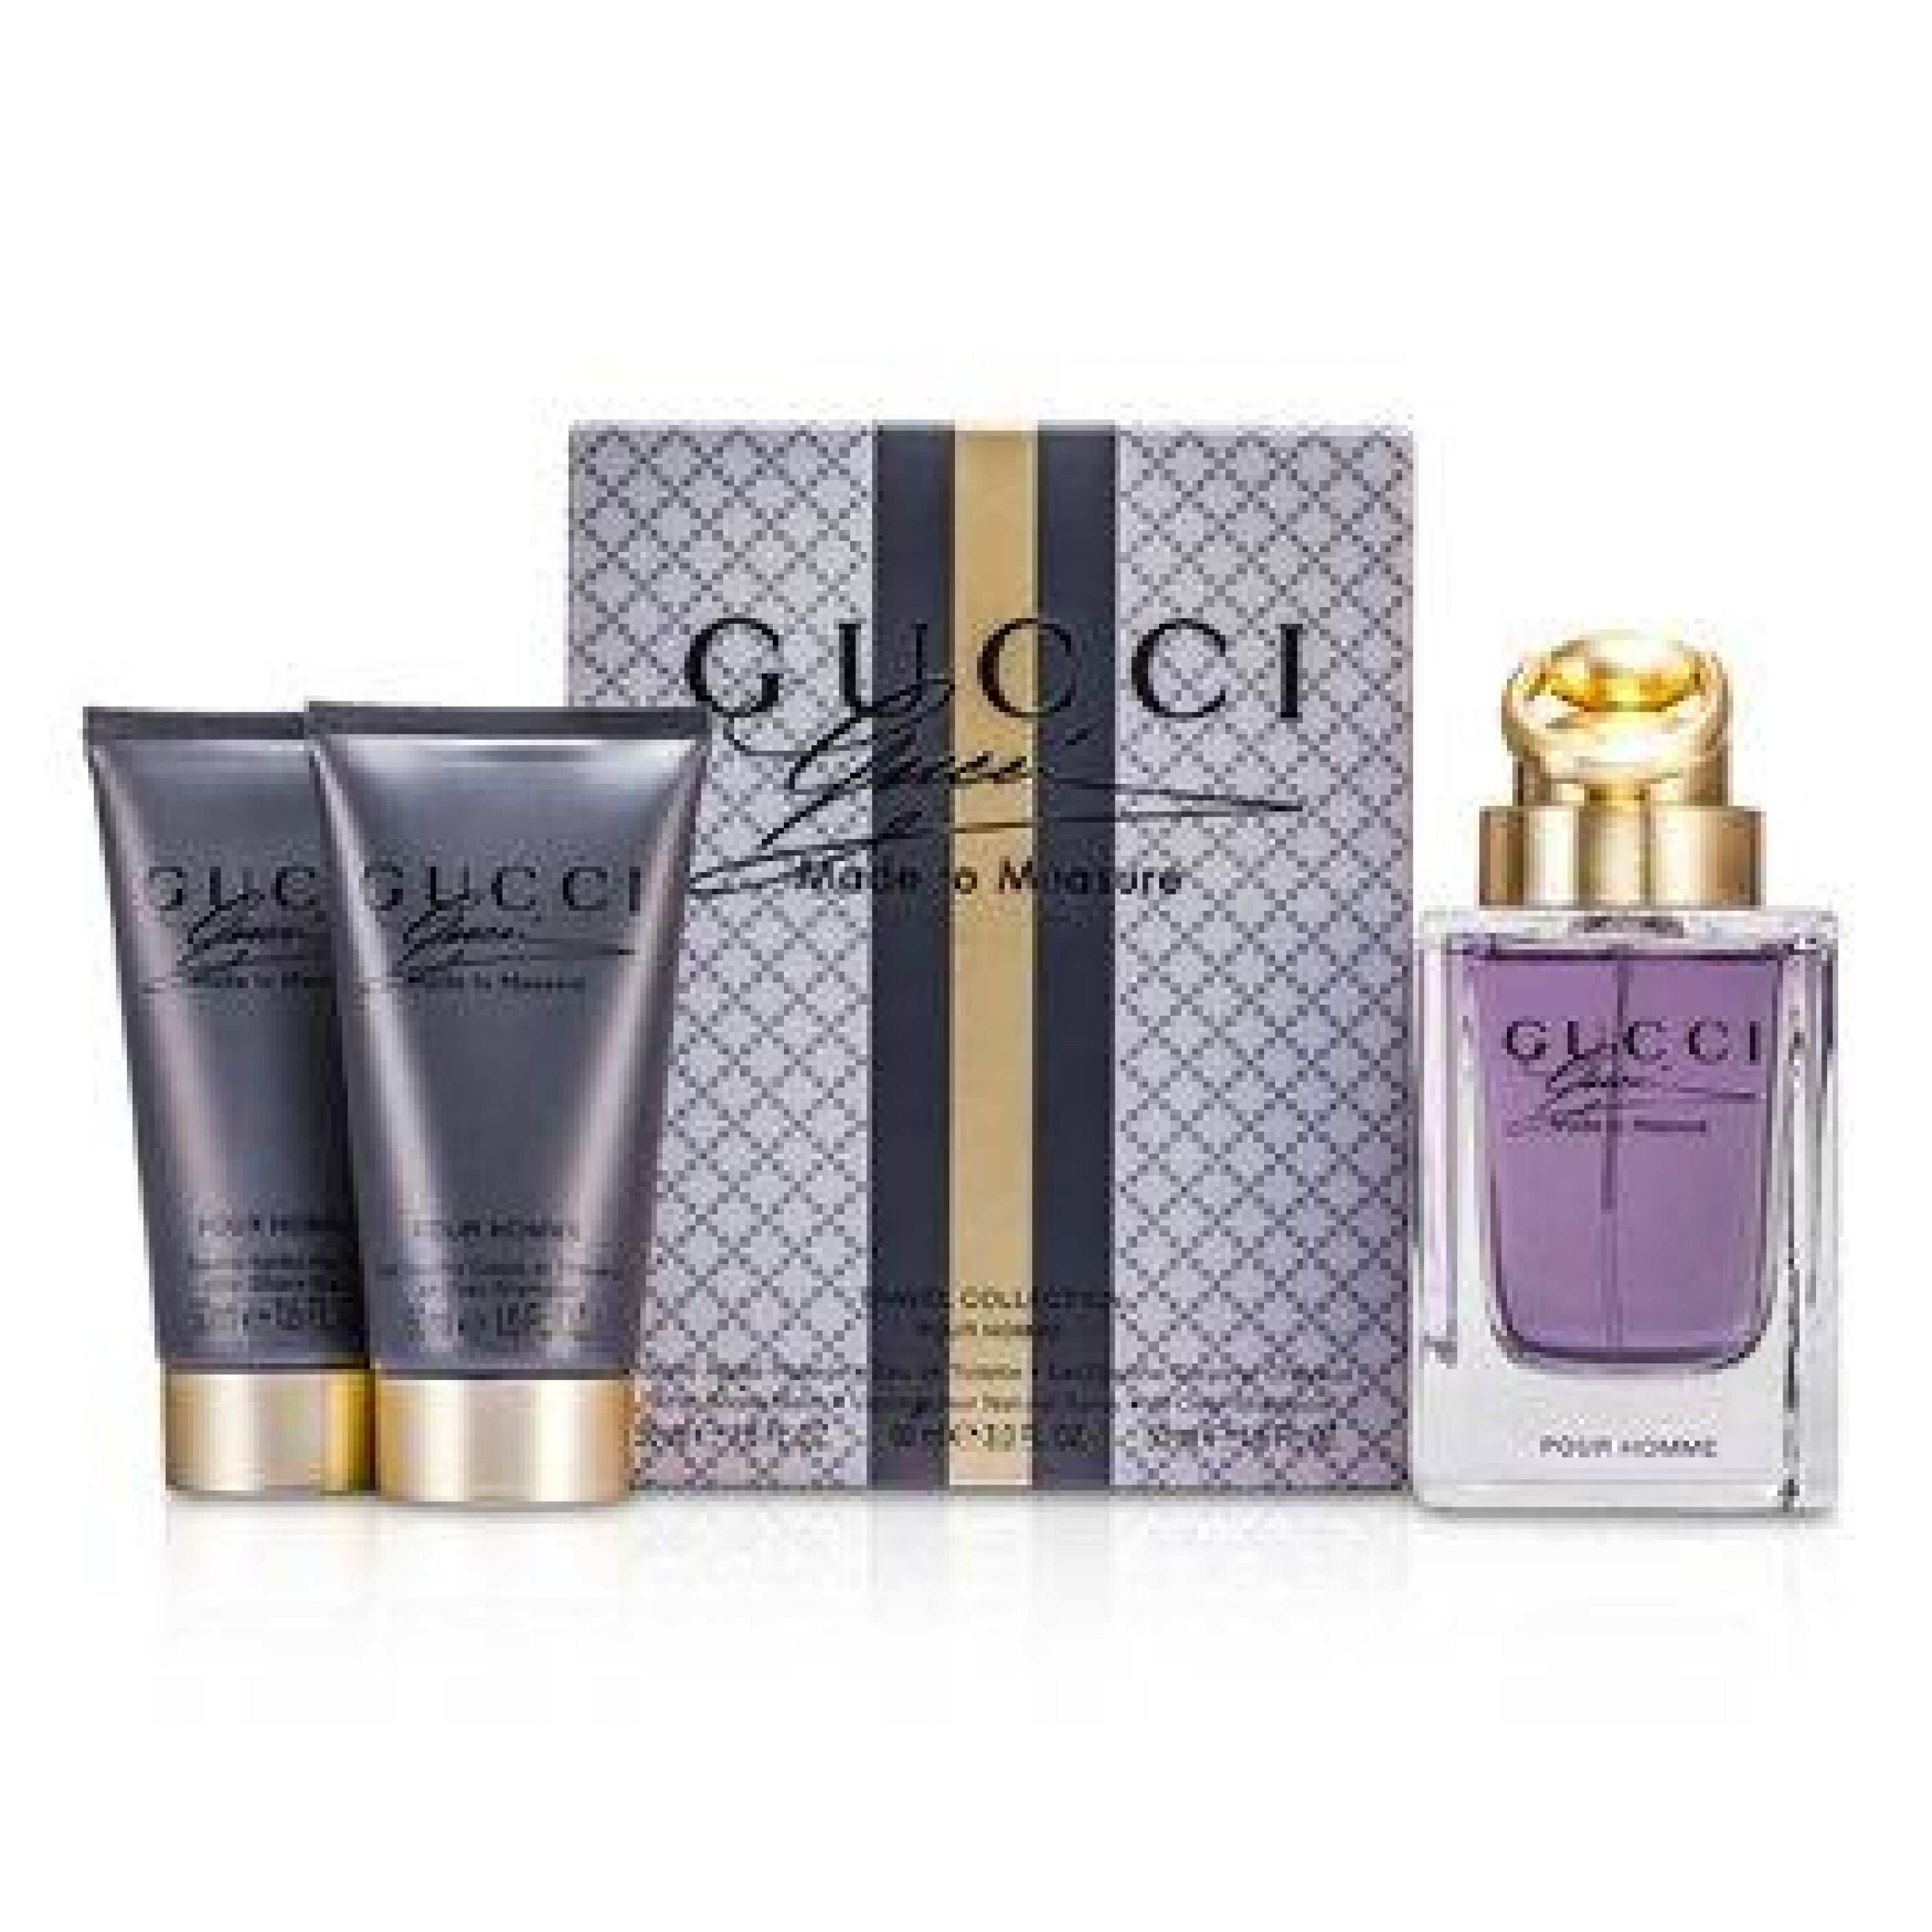 Gucci Made To Measure 3 Pcs Travel Gift Set - 90Ml Edt Spray + 50Ml After Shave Balm Shampoo (Men)